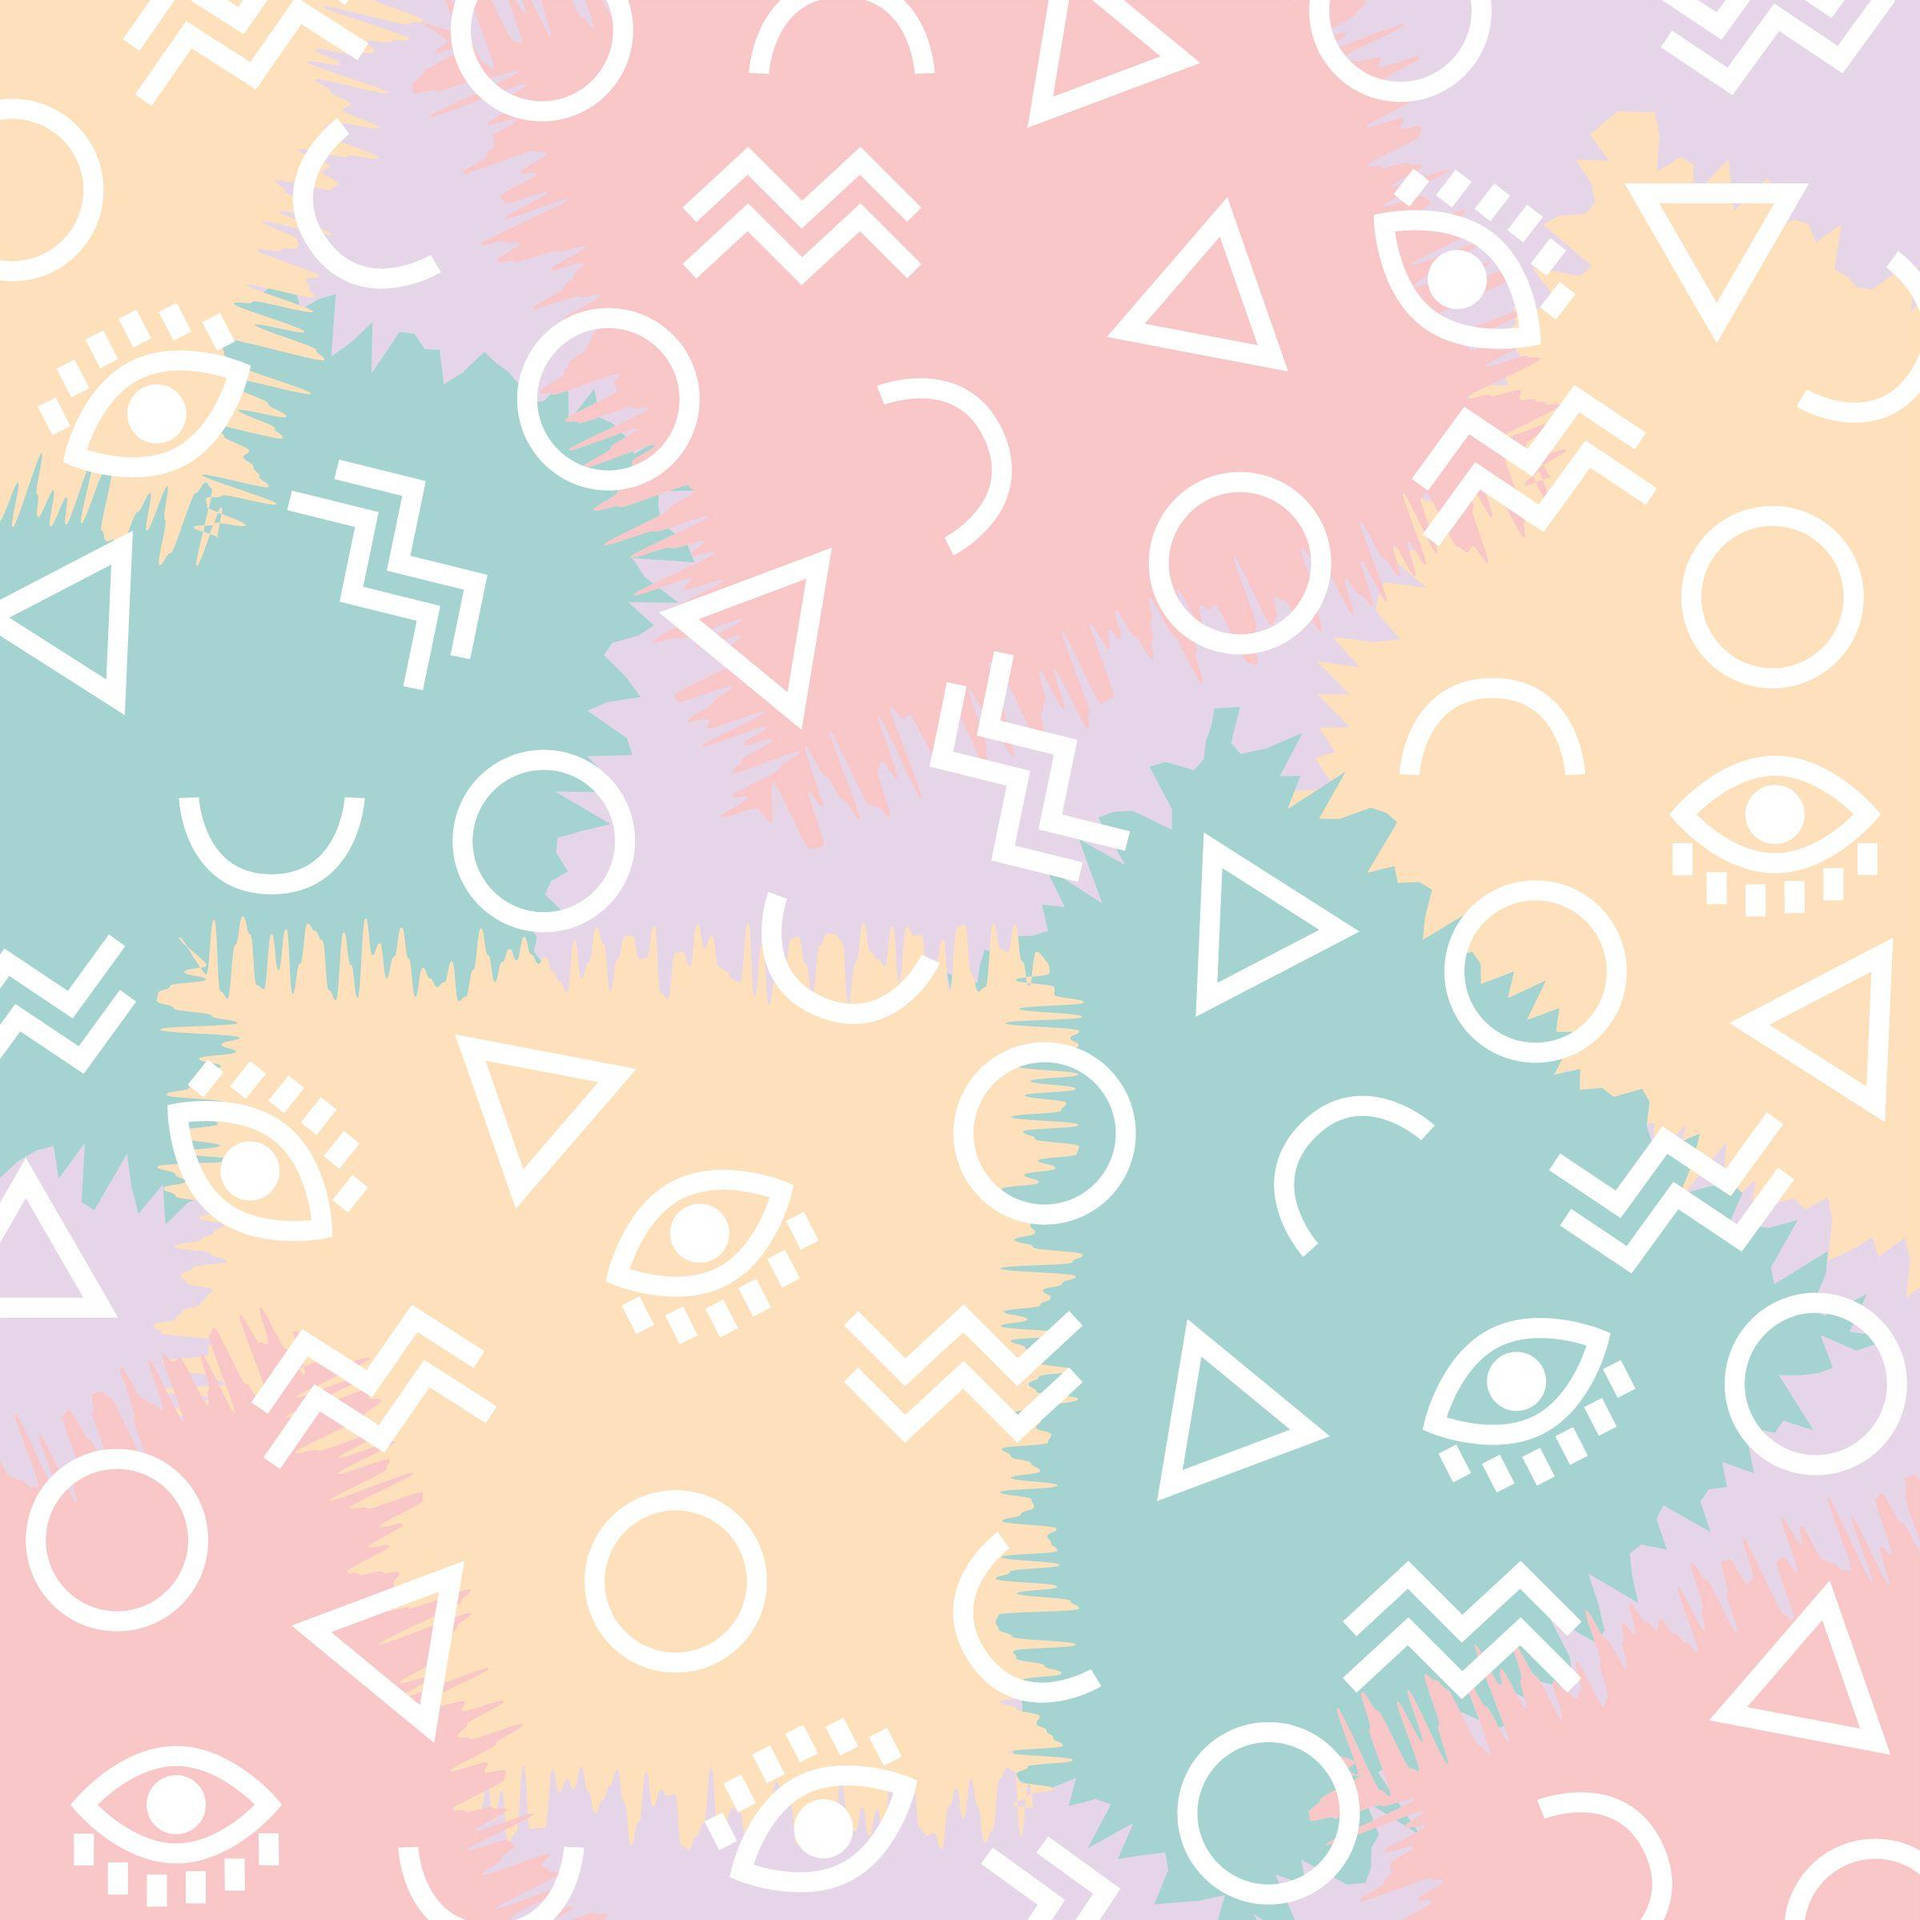 Energetic Cute Pastel Shapes Background